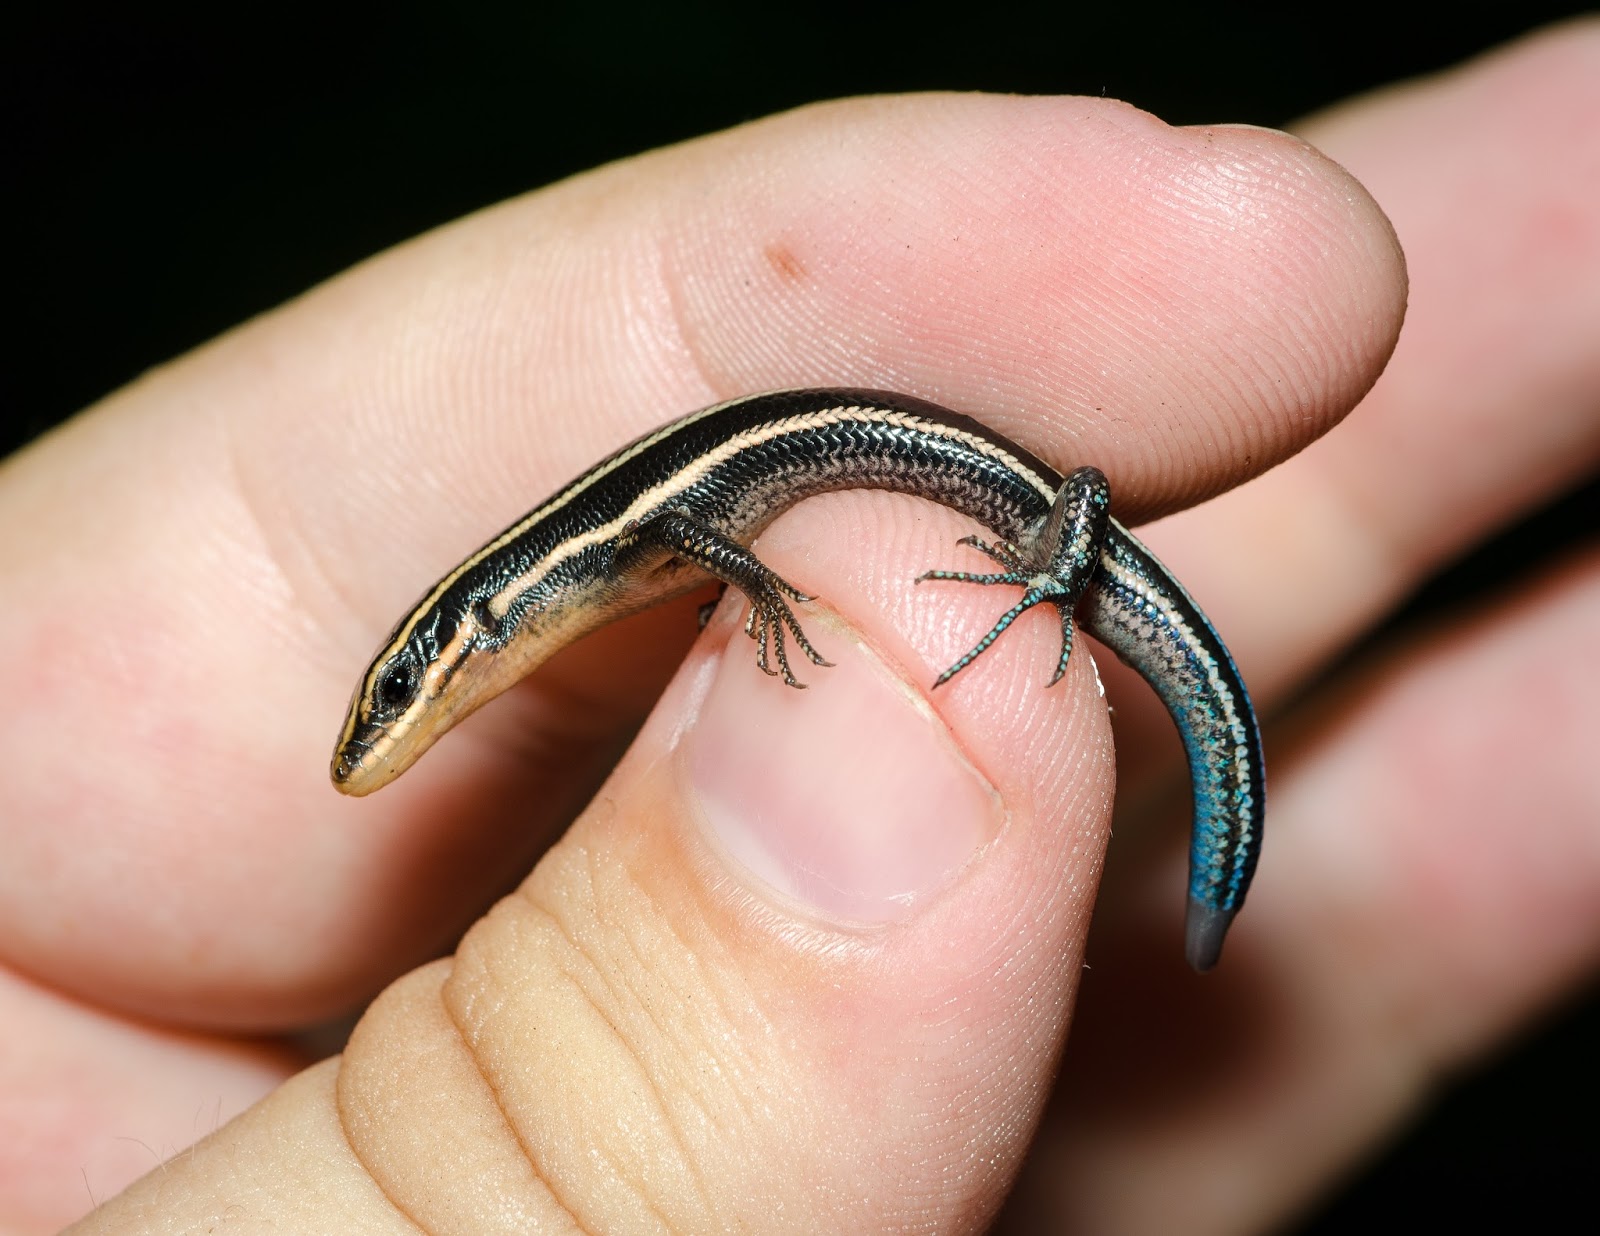 Baby Common Five-Lined Skink